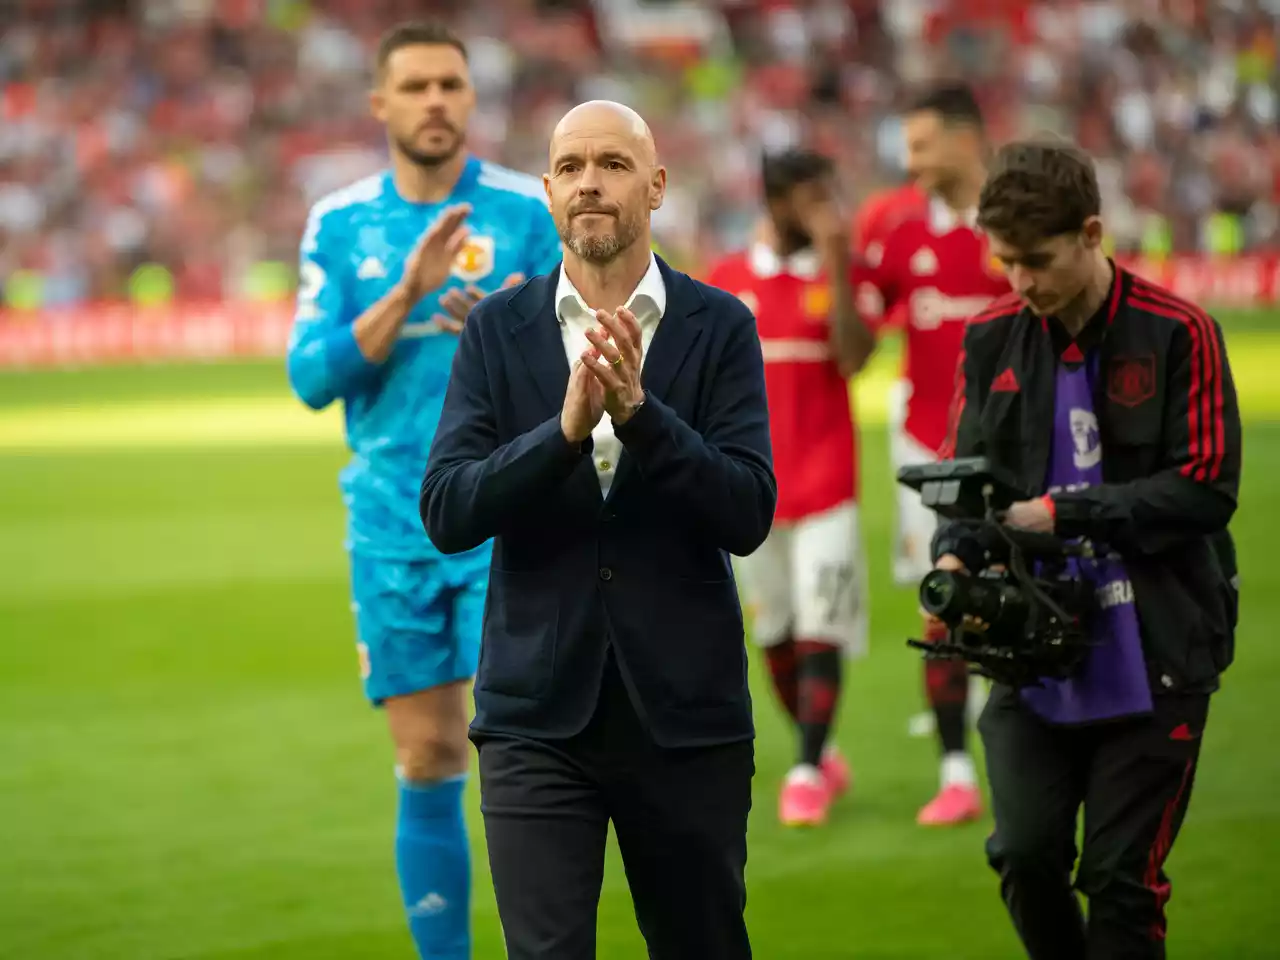 Erik ten Hag applauds fans after United's final home game of the season